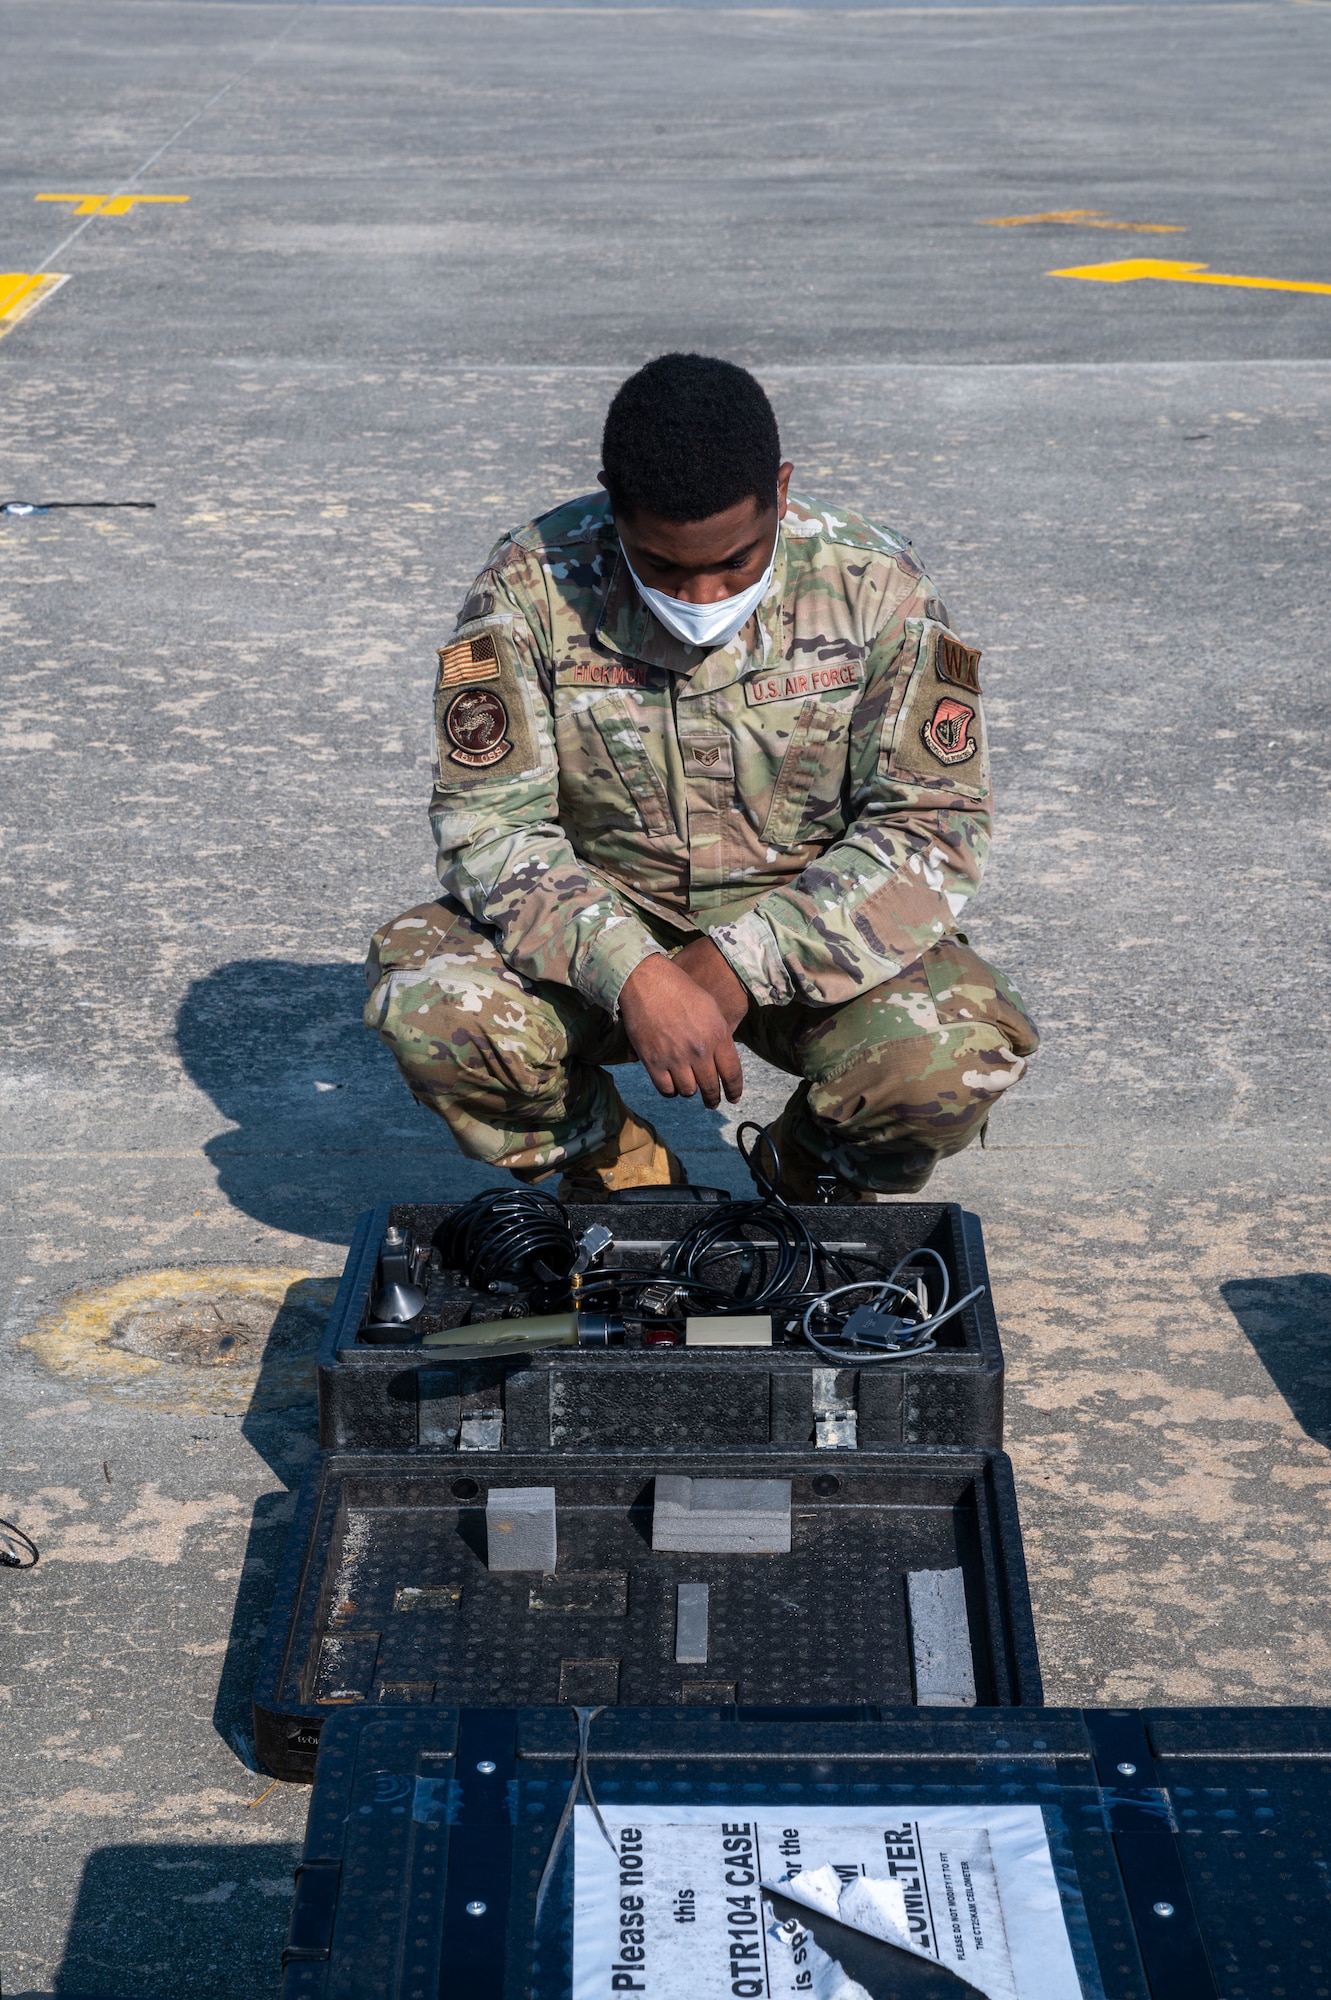 U.S. Air Force Staff Sgt. Jamal Hickmon, 51st Operational Support Squadron weather specialist, sets up a TMQ-53 tactical meteorological observing system during a combined training event involving USAF and Republic of Korea Air Force partners